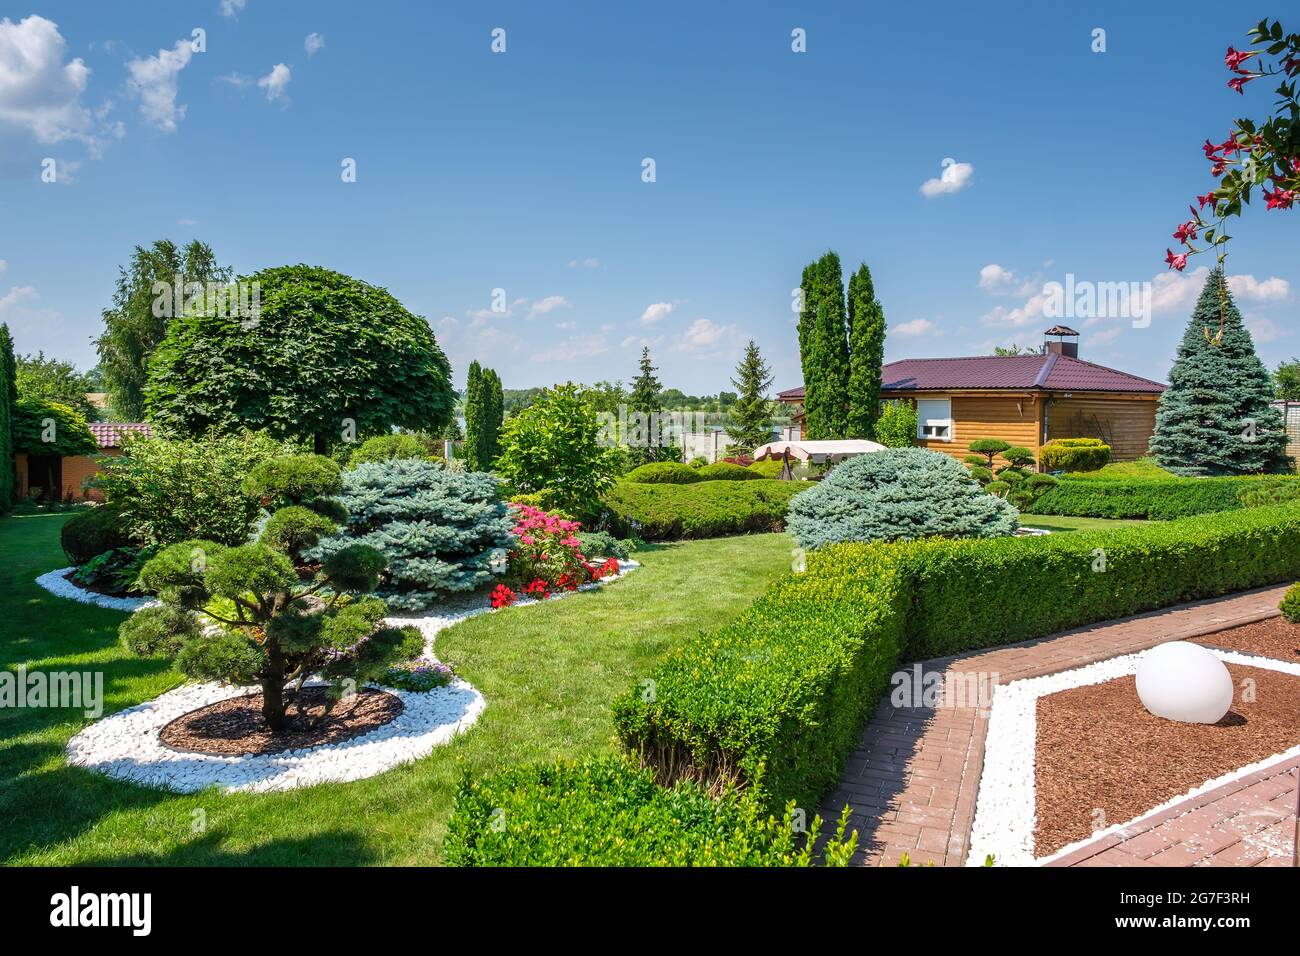 Beautiful backyard garden with nicely trimmed trees, bushes and stones  Stock Photo - Alamy